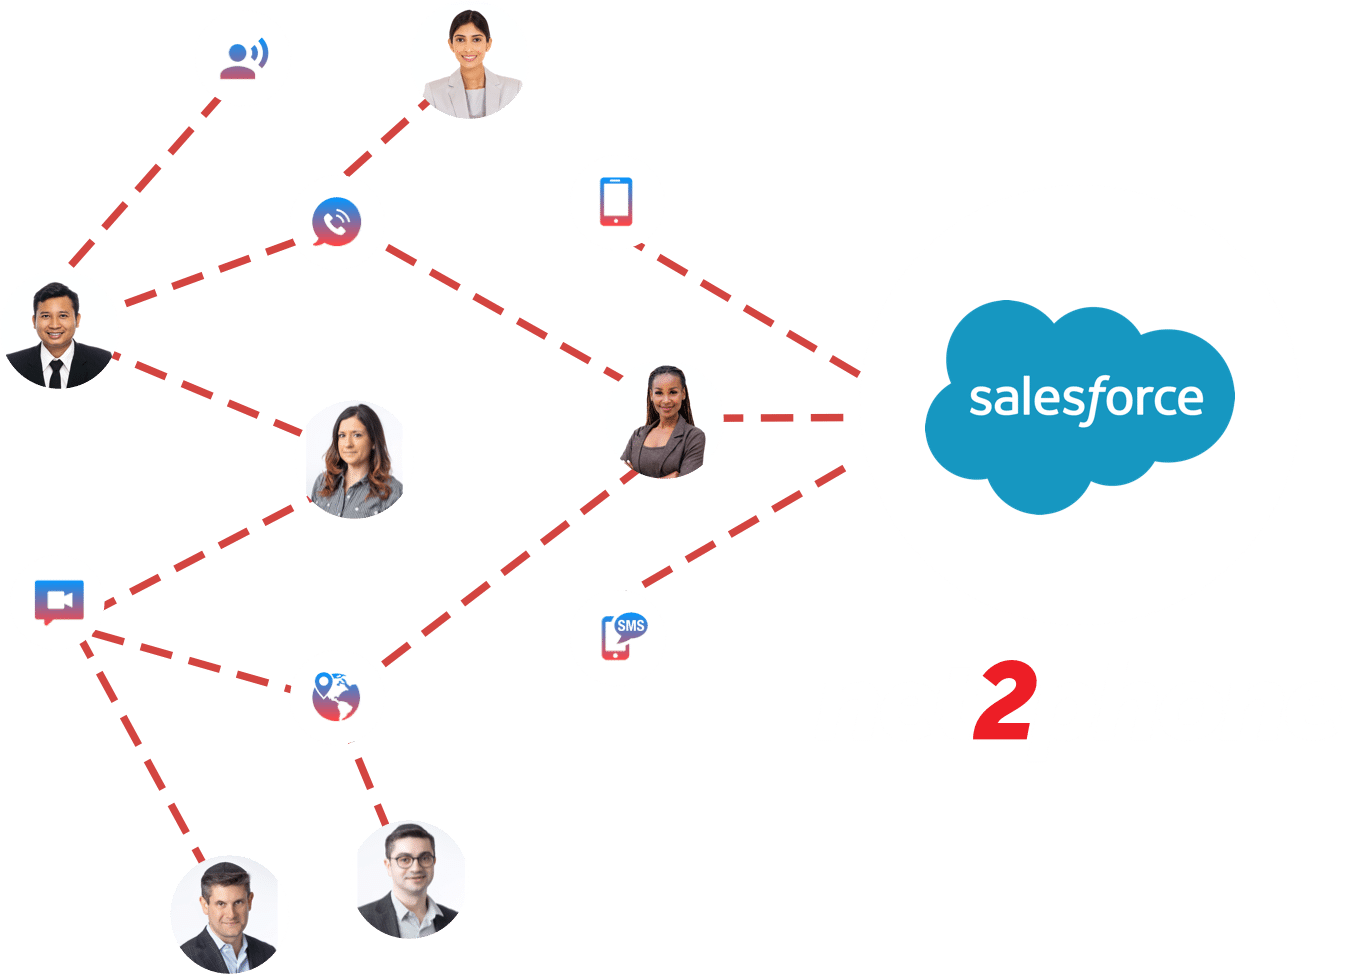 net2phone communicating with salesforce